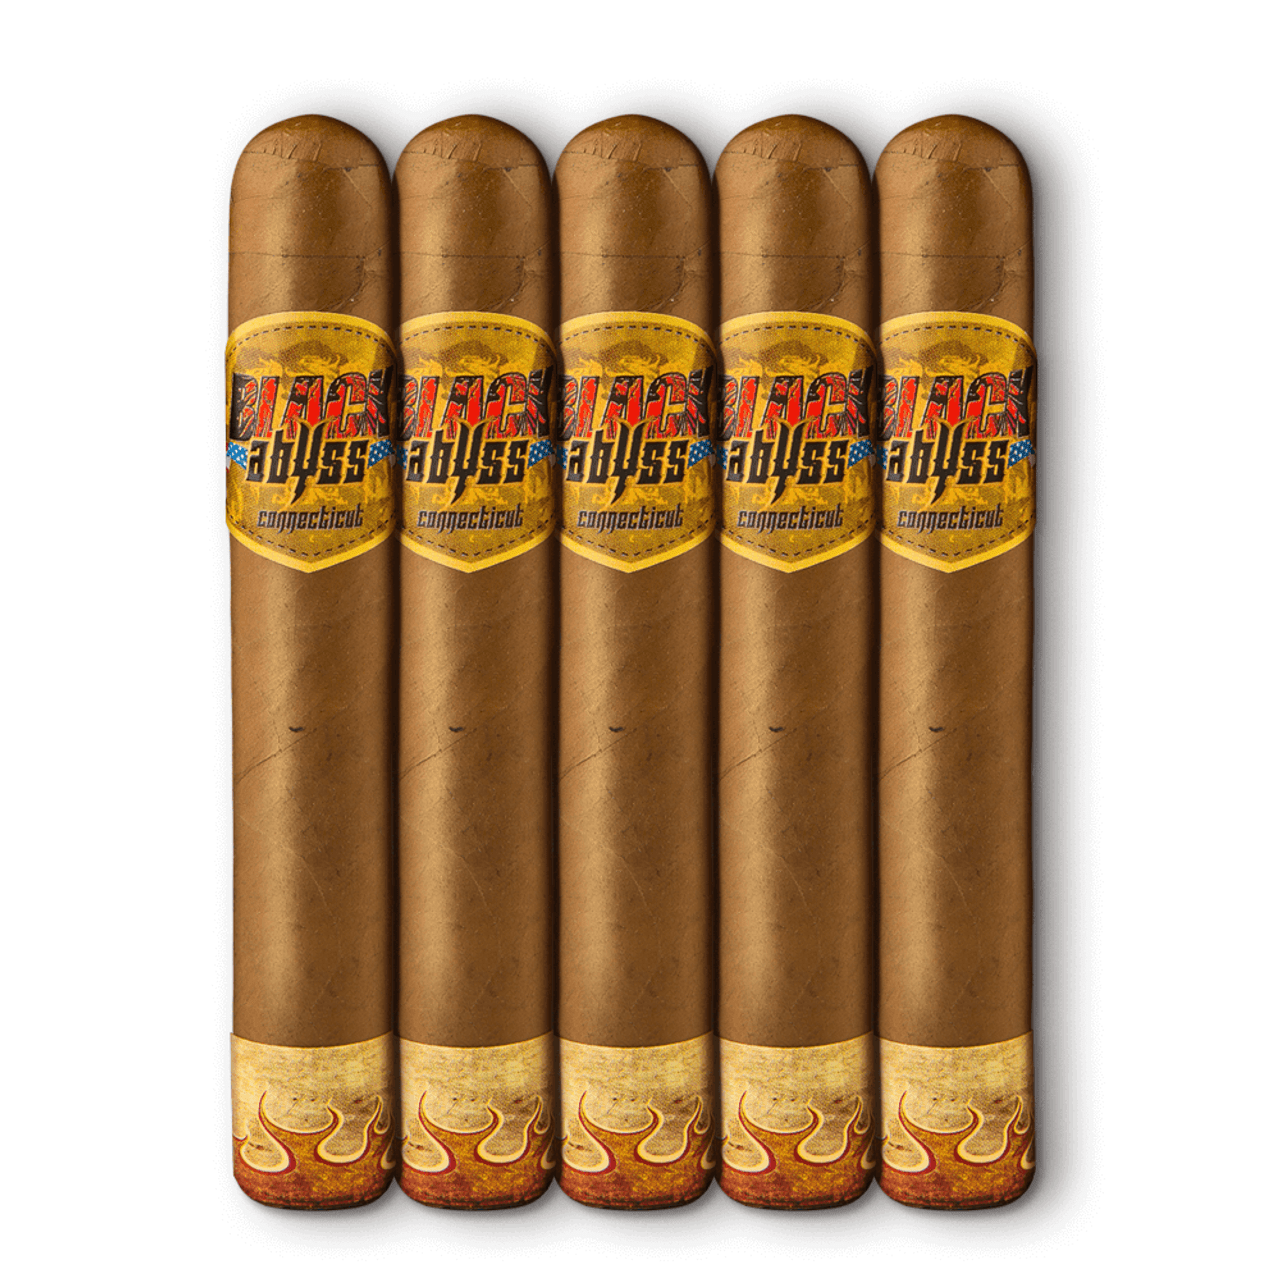 Black Abyss Connecticut Banshee Cigars - 5 x 50 (Pack of 5)